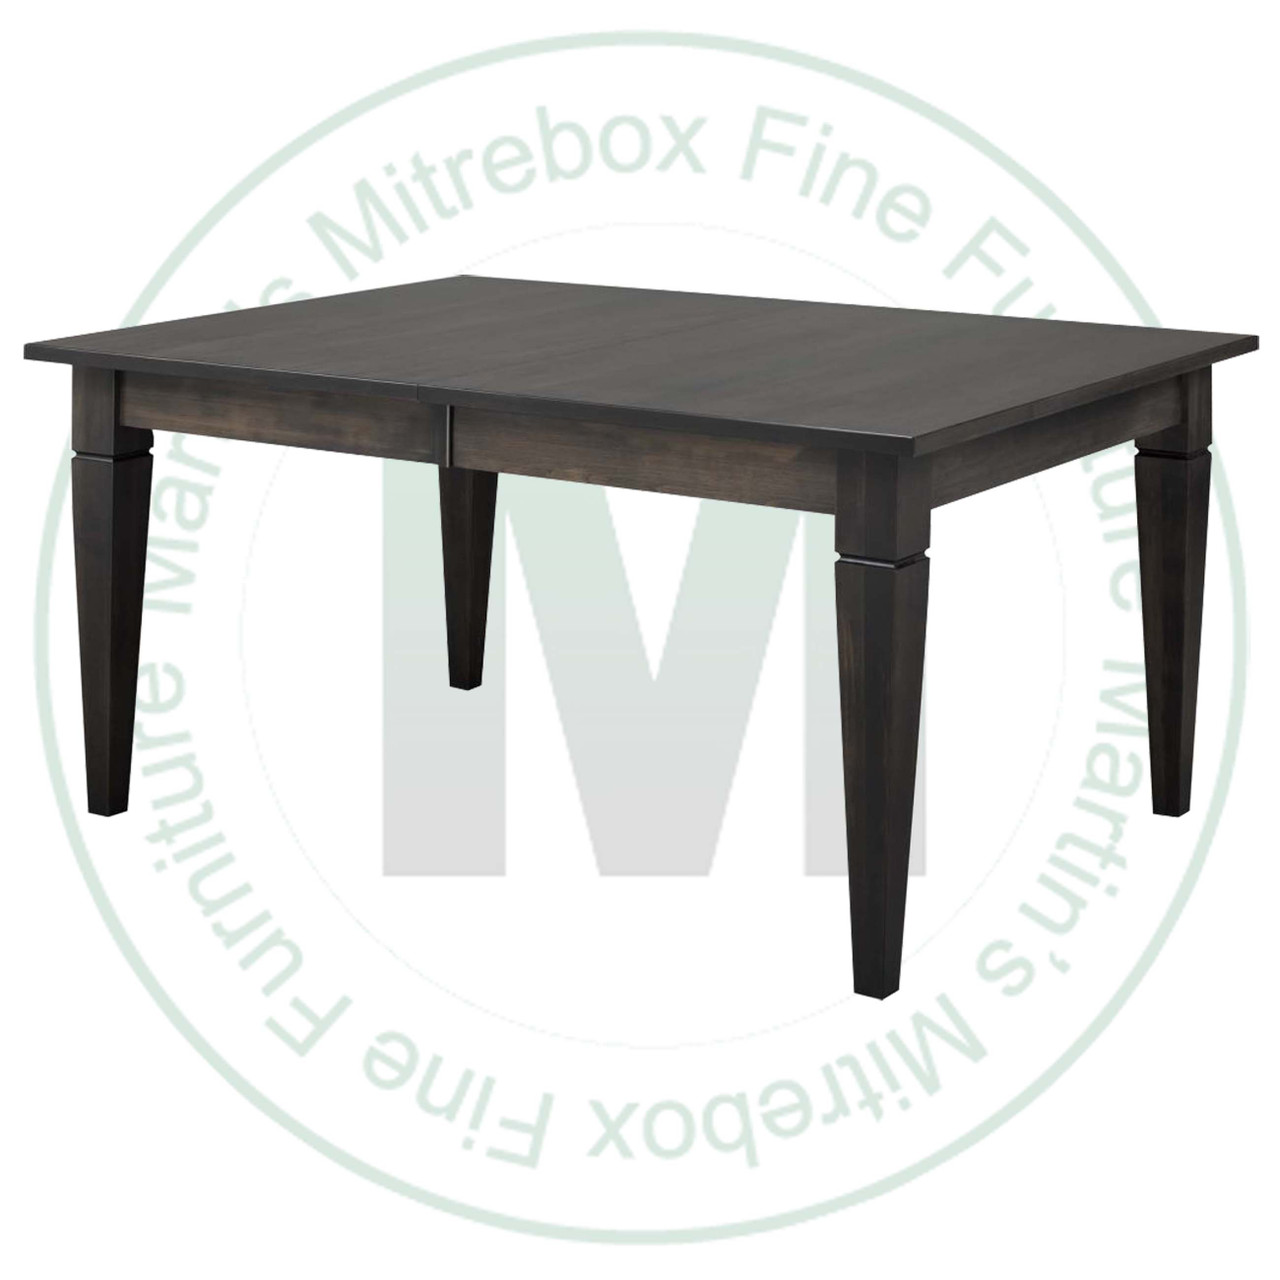 Wormy Maple Reesor Solid Top Harvest Table 42''D x 72''W x 30''H Table Has 1'' Thick Top And 2 - 16'' Extensions